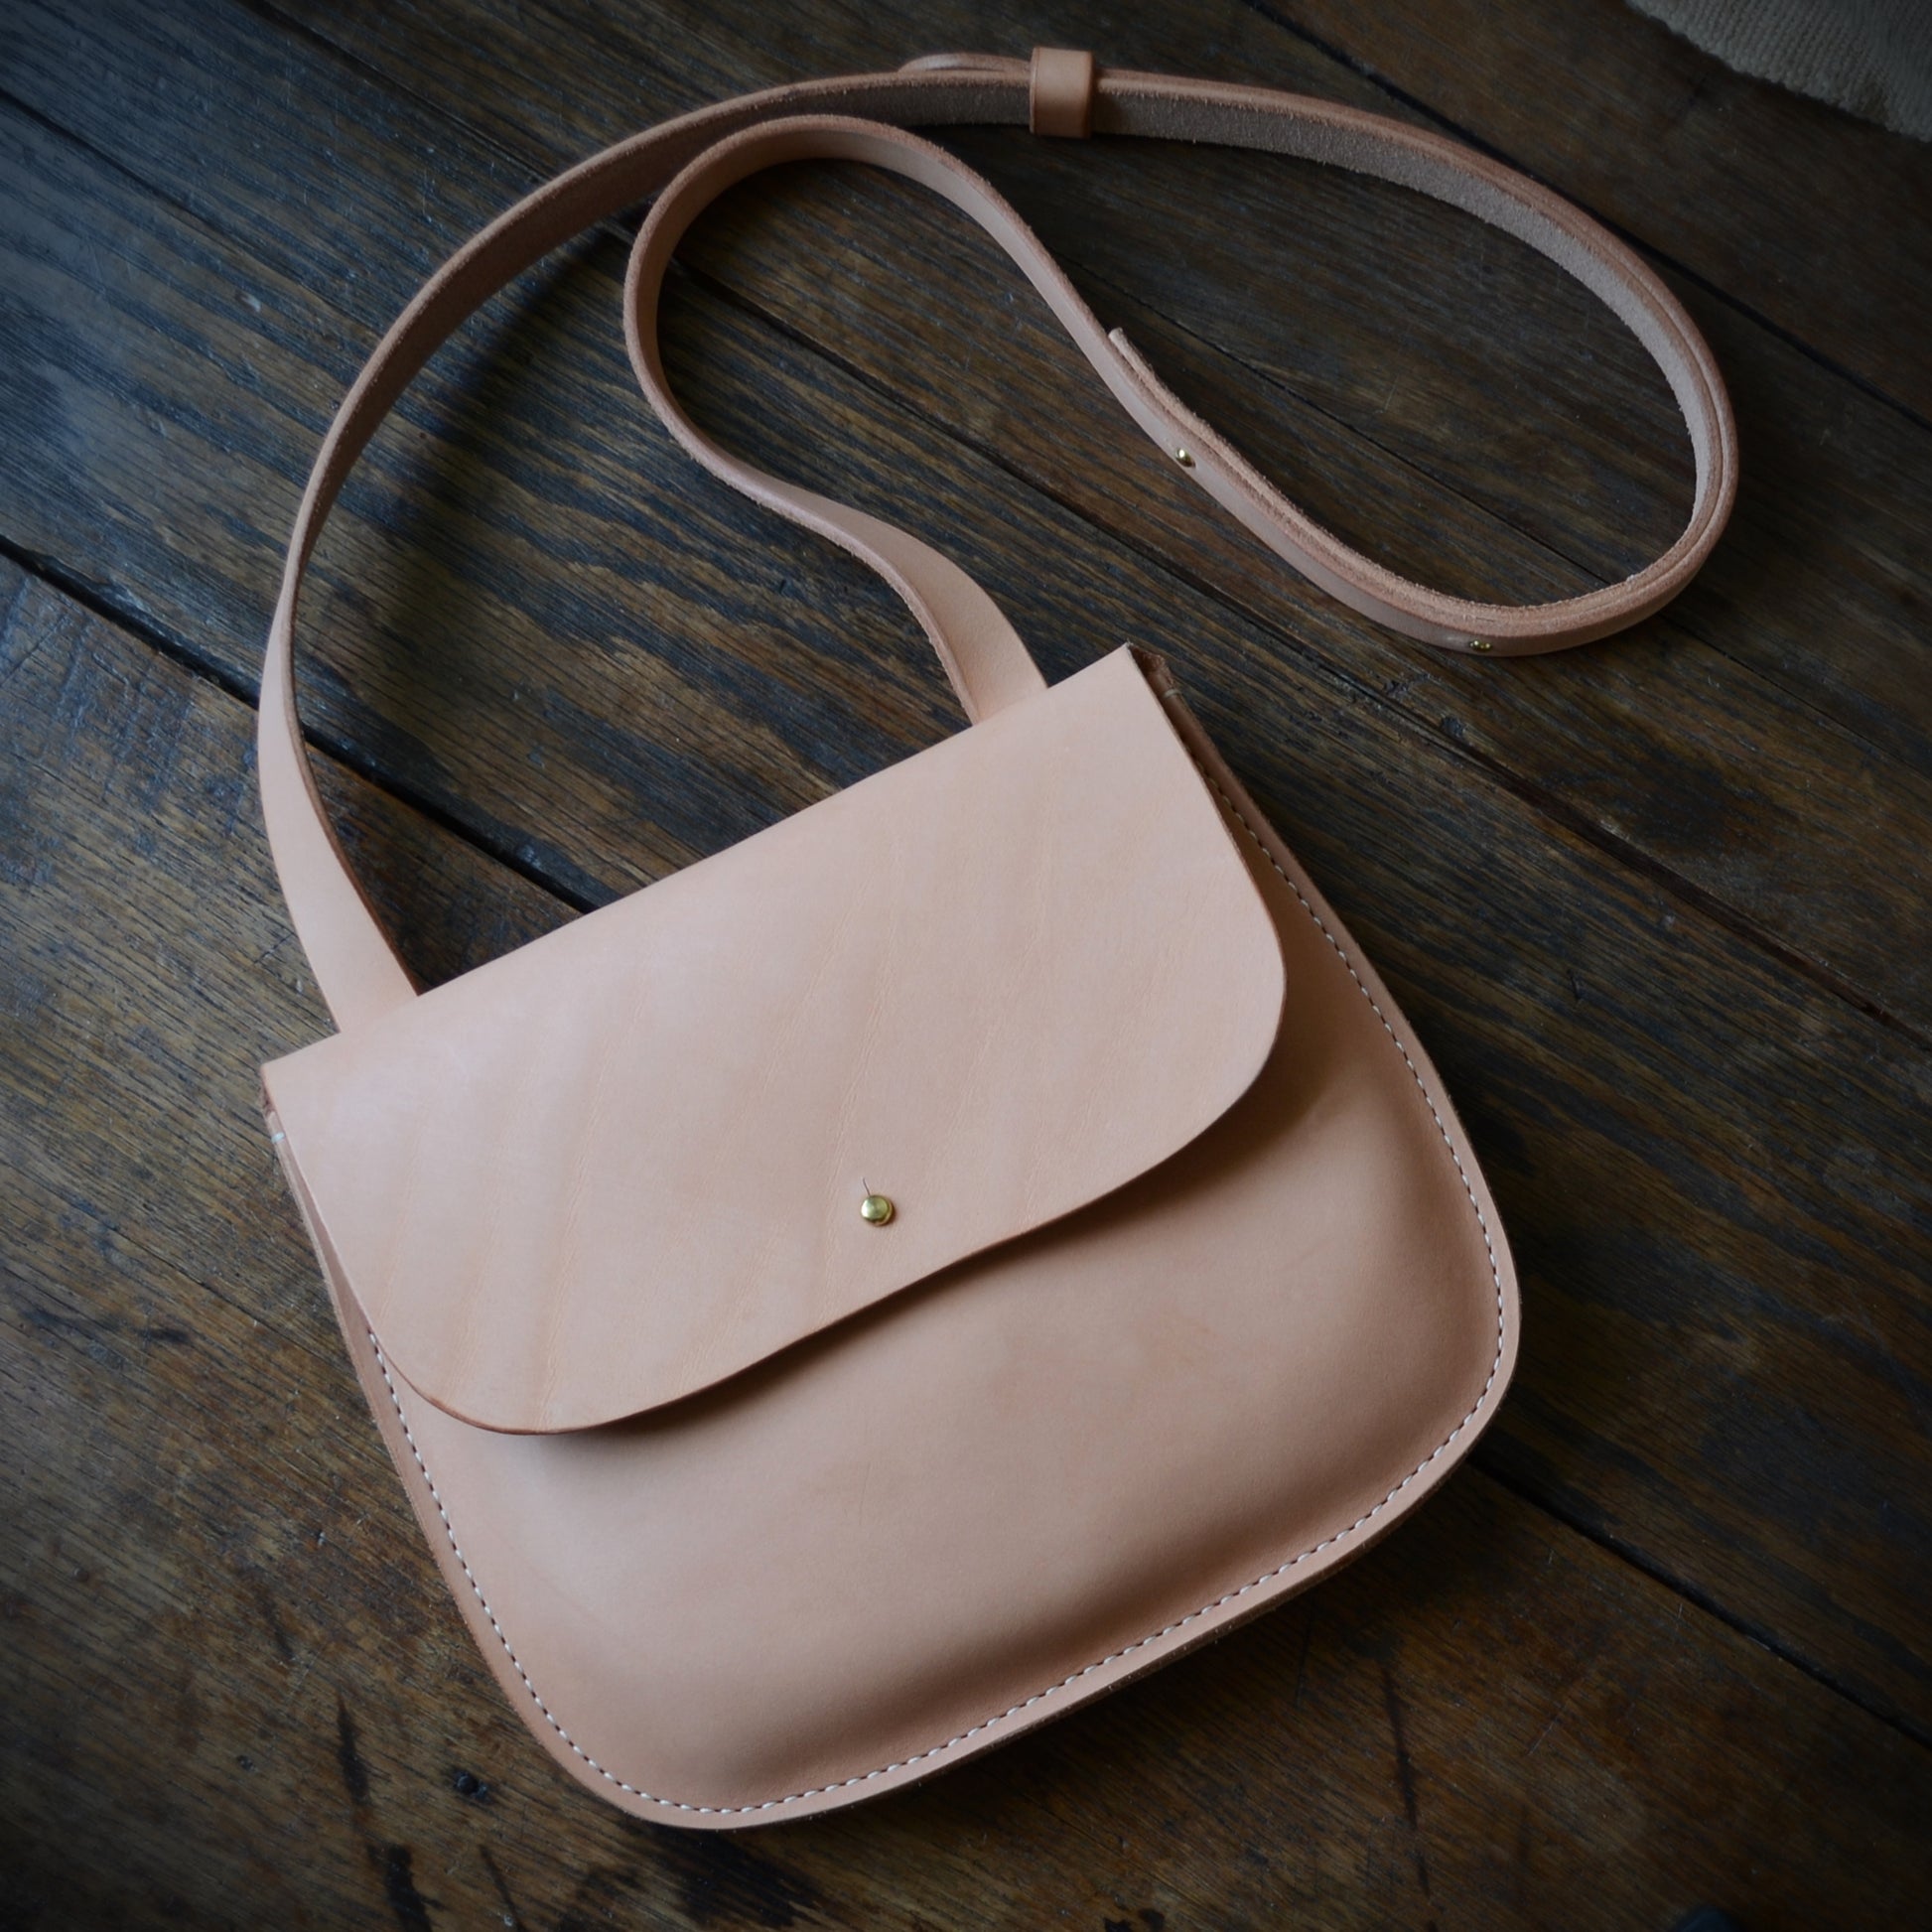 A natural color leather crossbody bag lays on a dark plank wood surface with the strap curling off to the side.